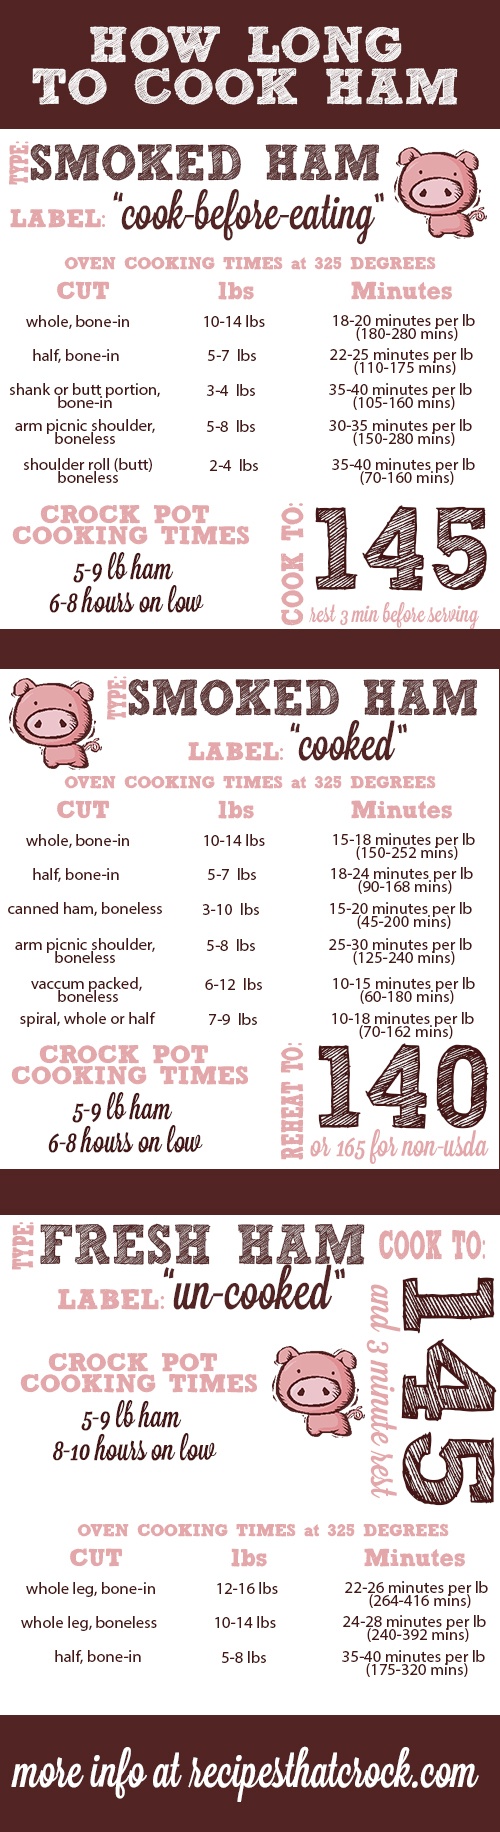 How-Long-to-Cook-Ham-Infographic1